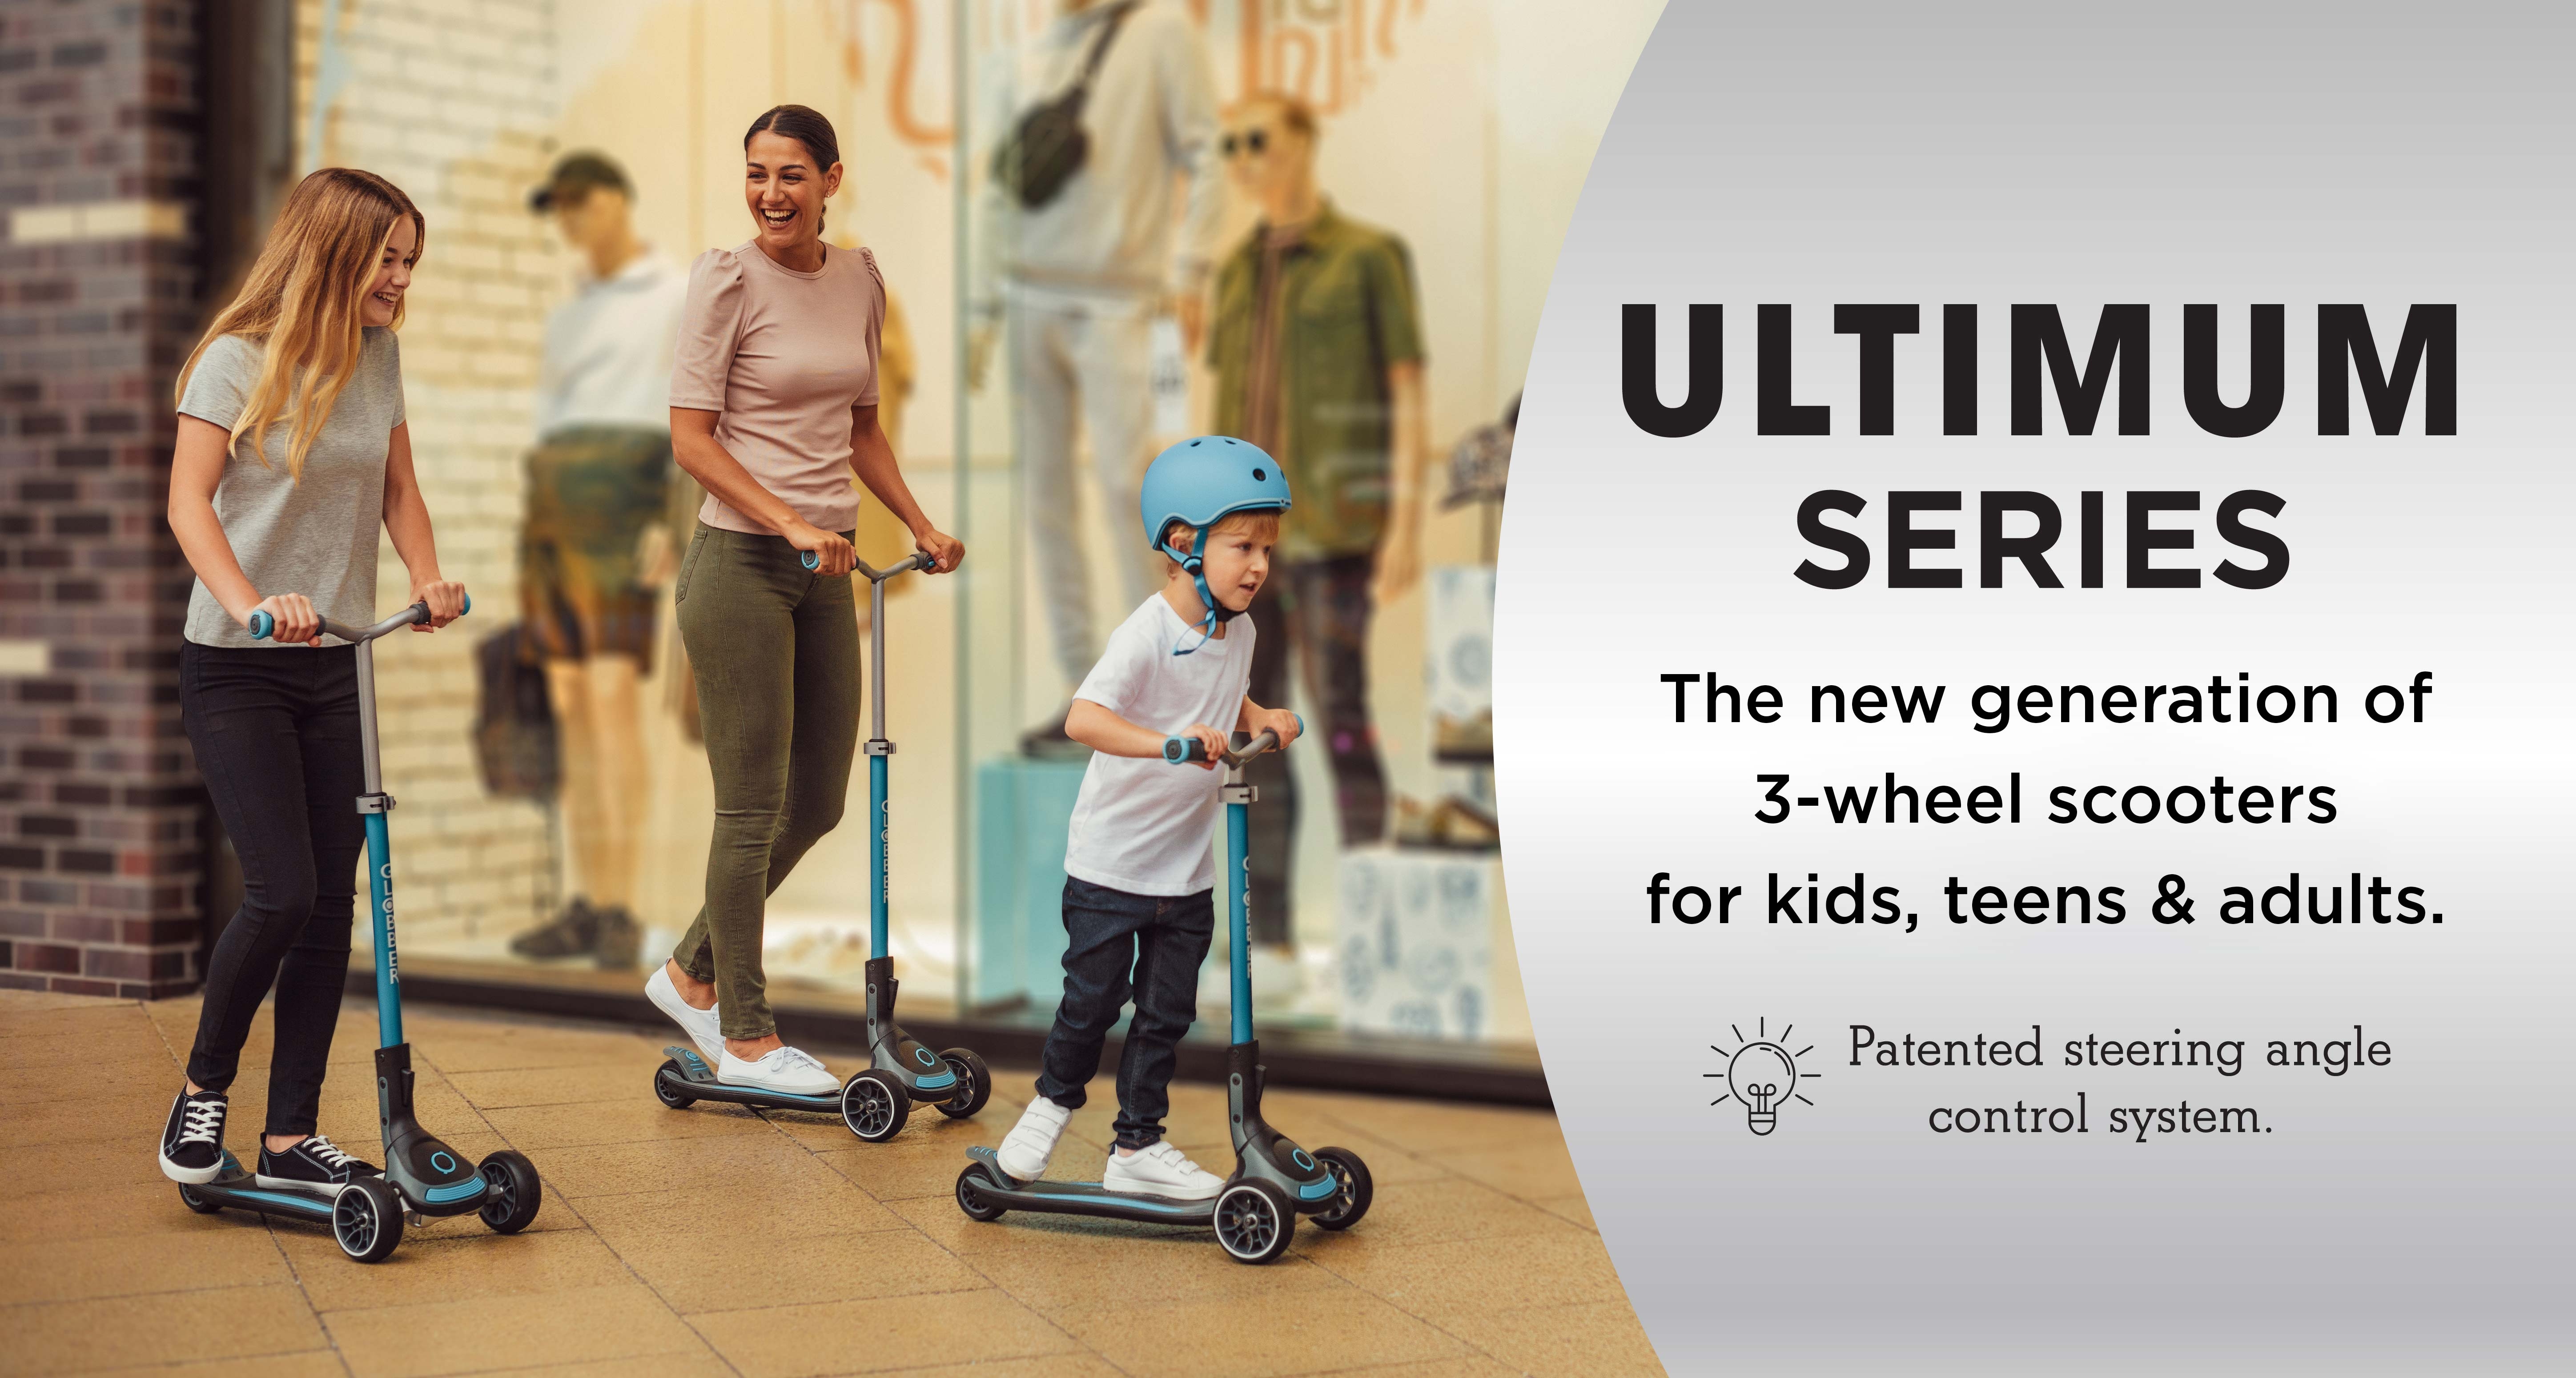 The new generation of 3-wheel scooters for kids, teens & adults